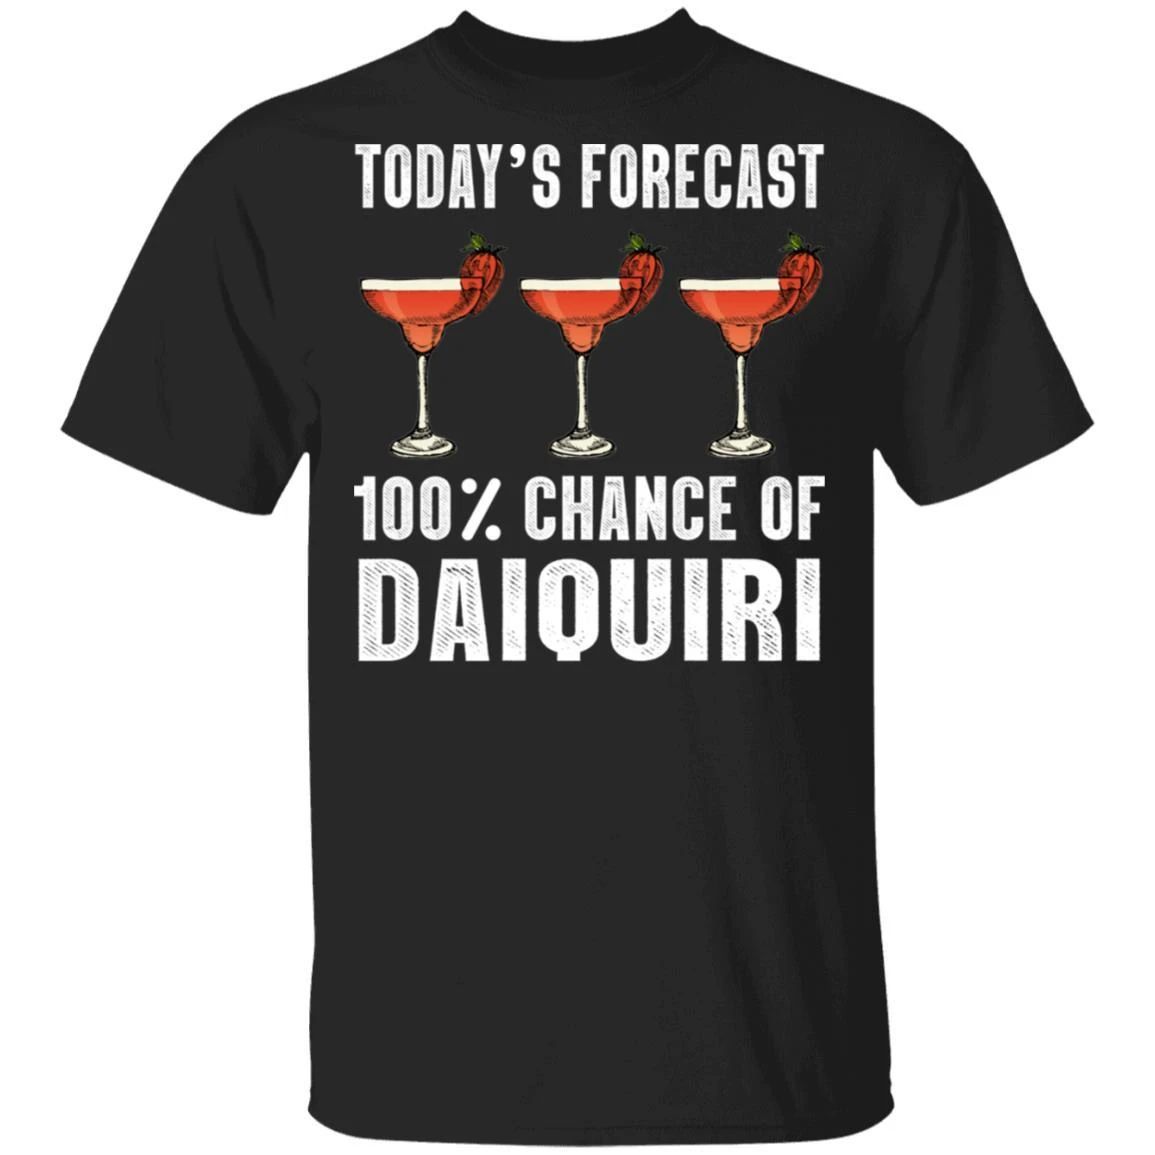 Today’s Forecast 100% Daiquiri T-shirt Cocktail Tee